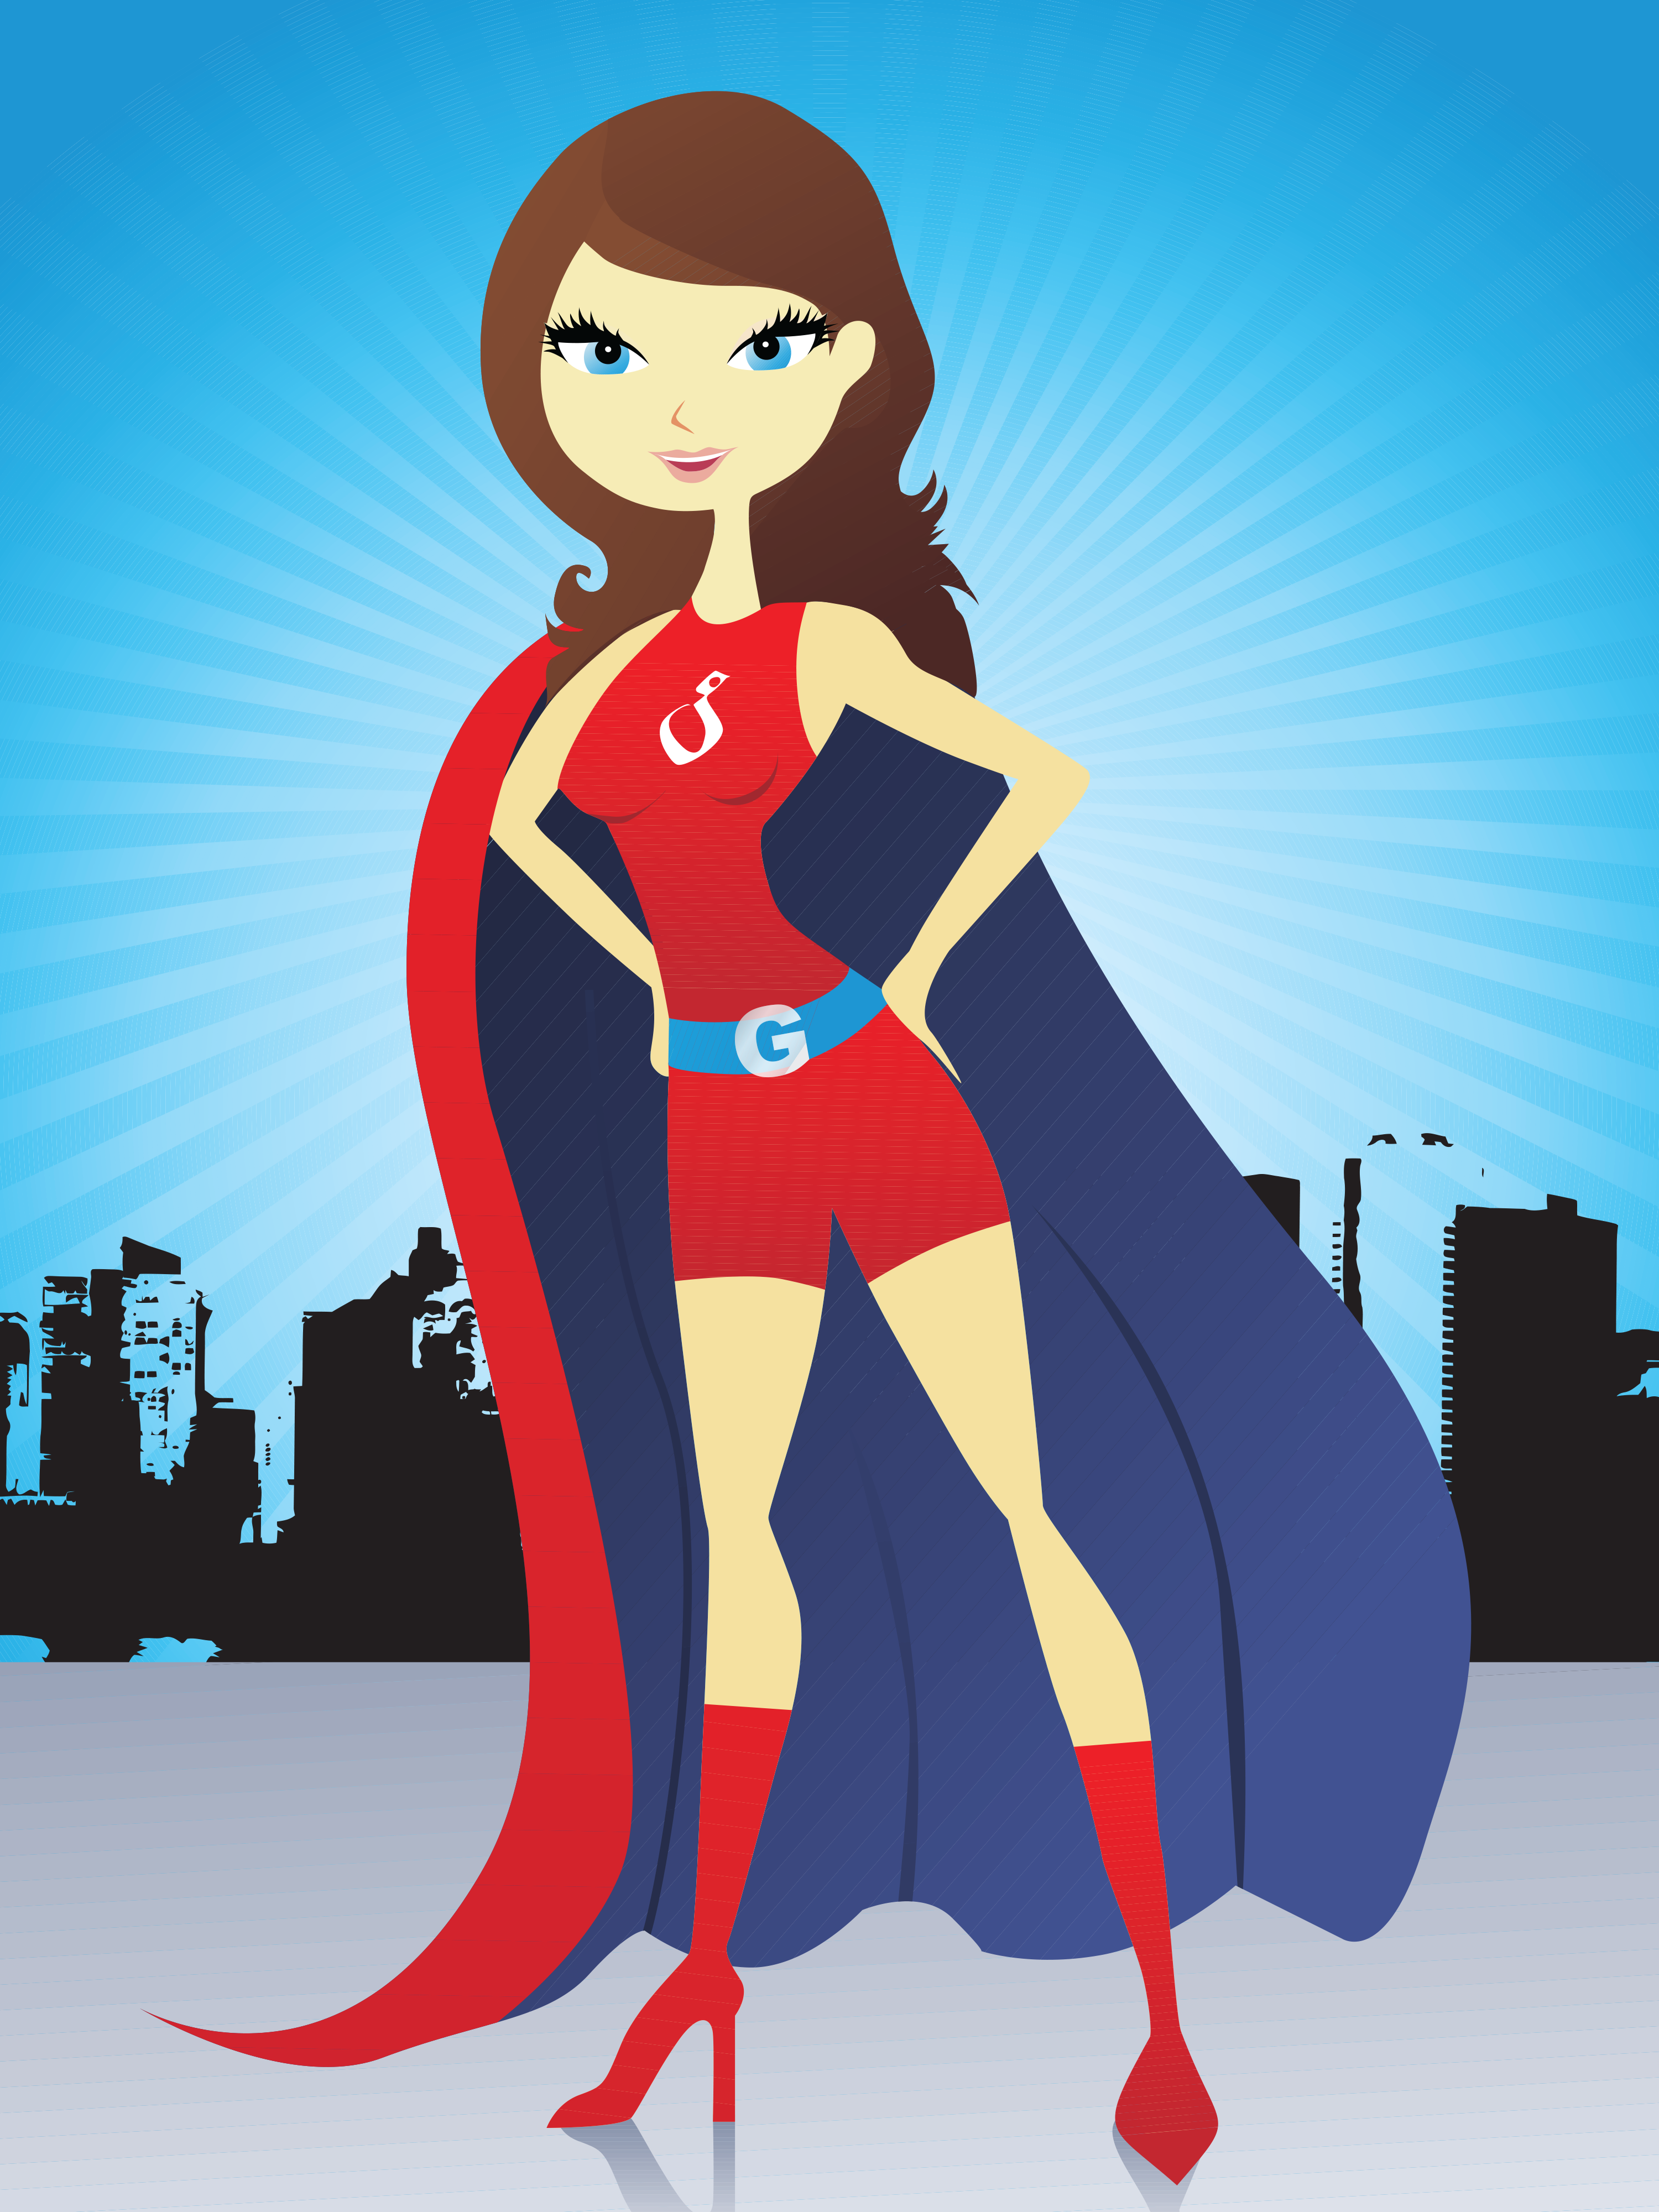 Want to be the confident super hero who get’s it done?